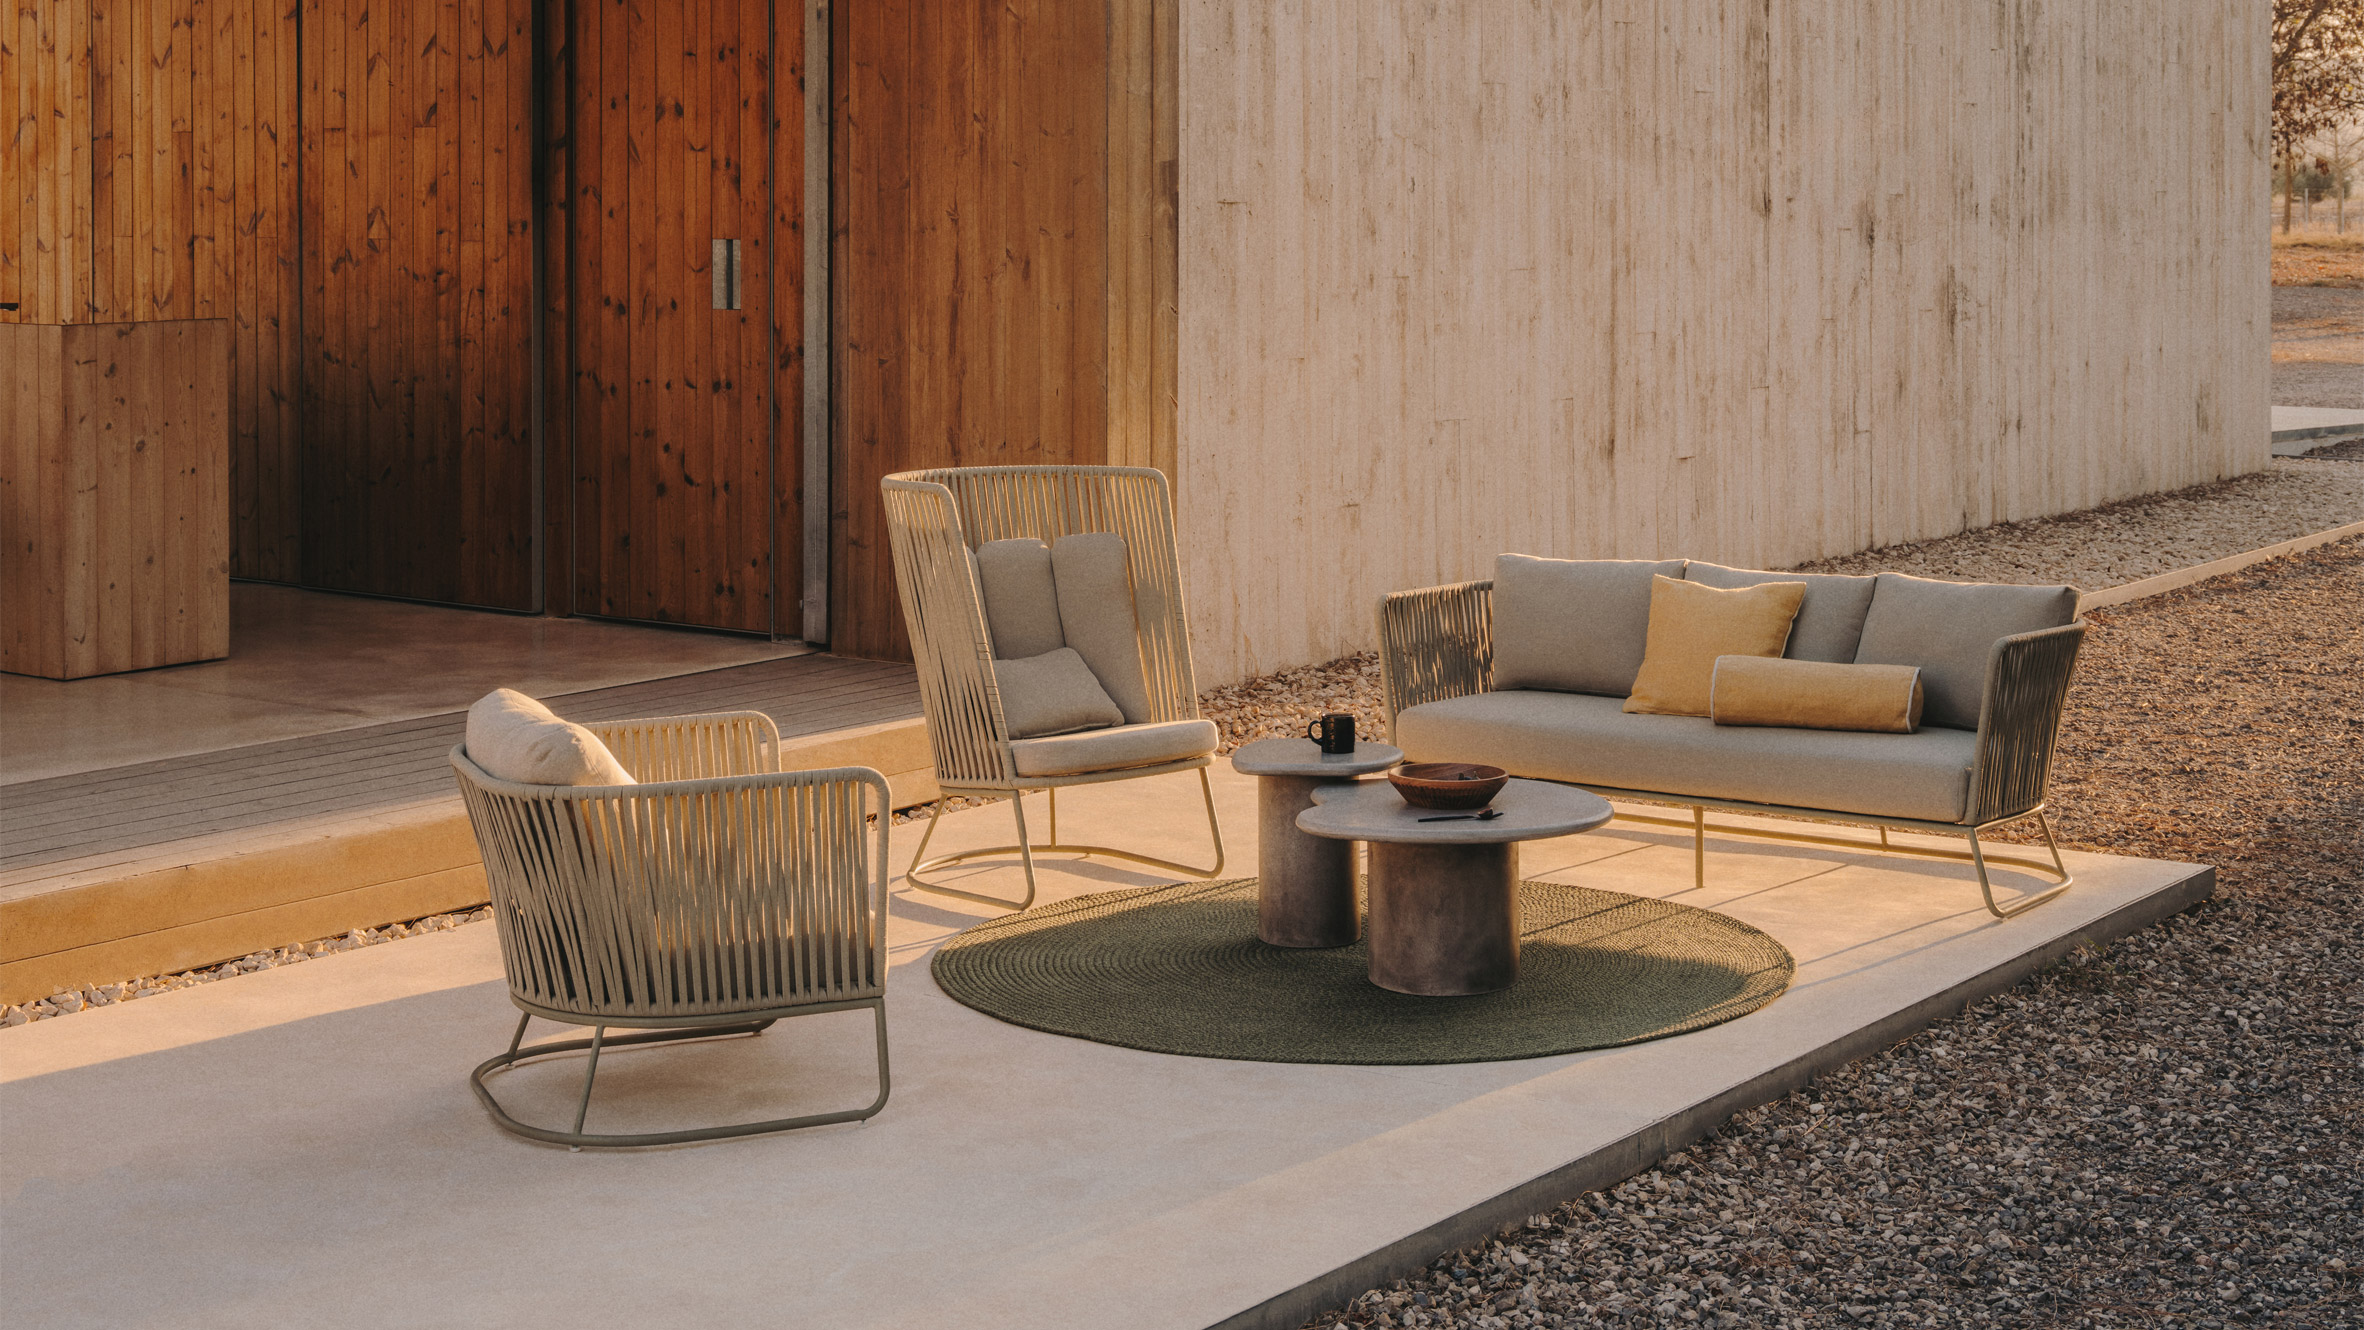 Kave Home uses natural materials for outdoor furniture collection